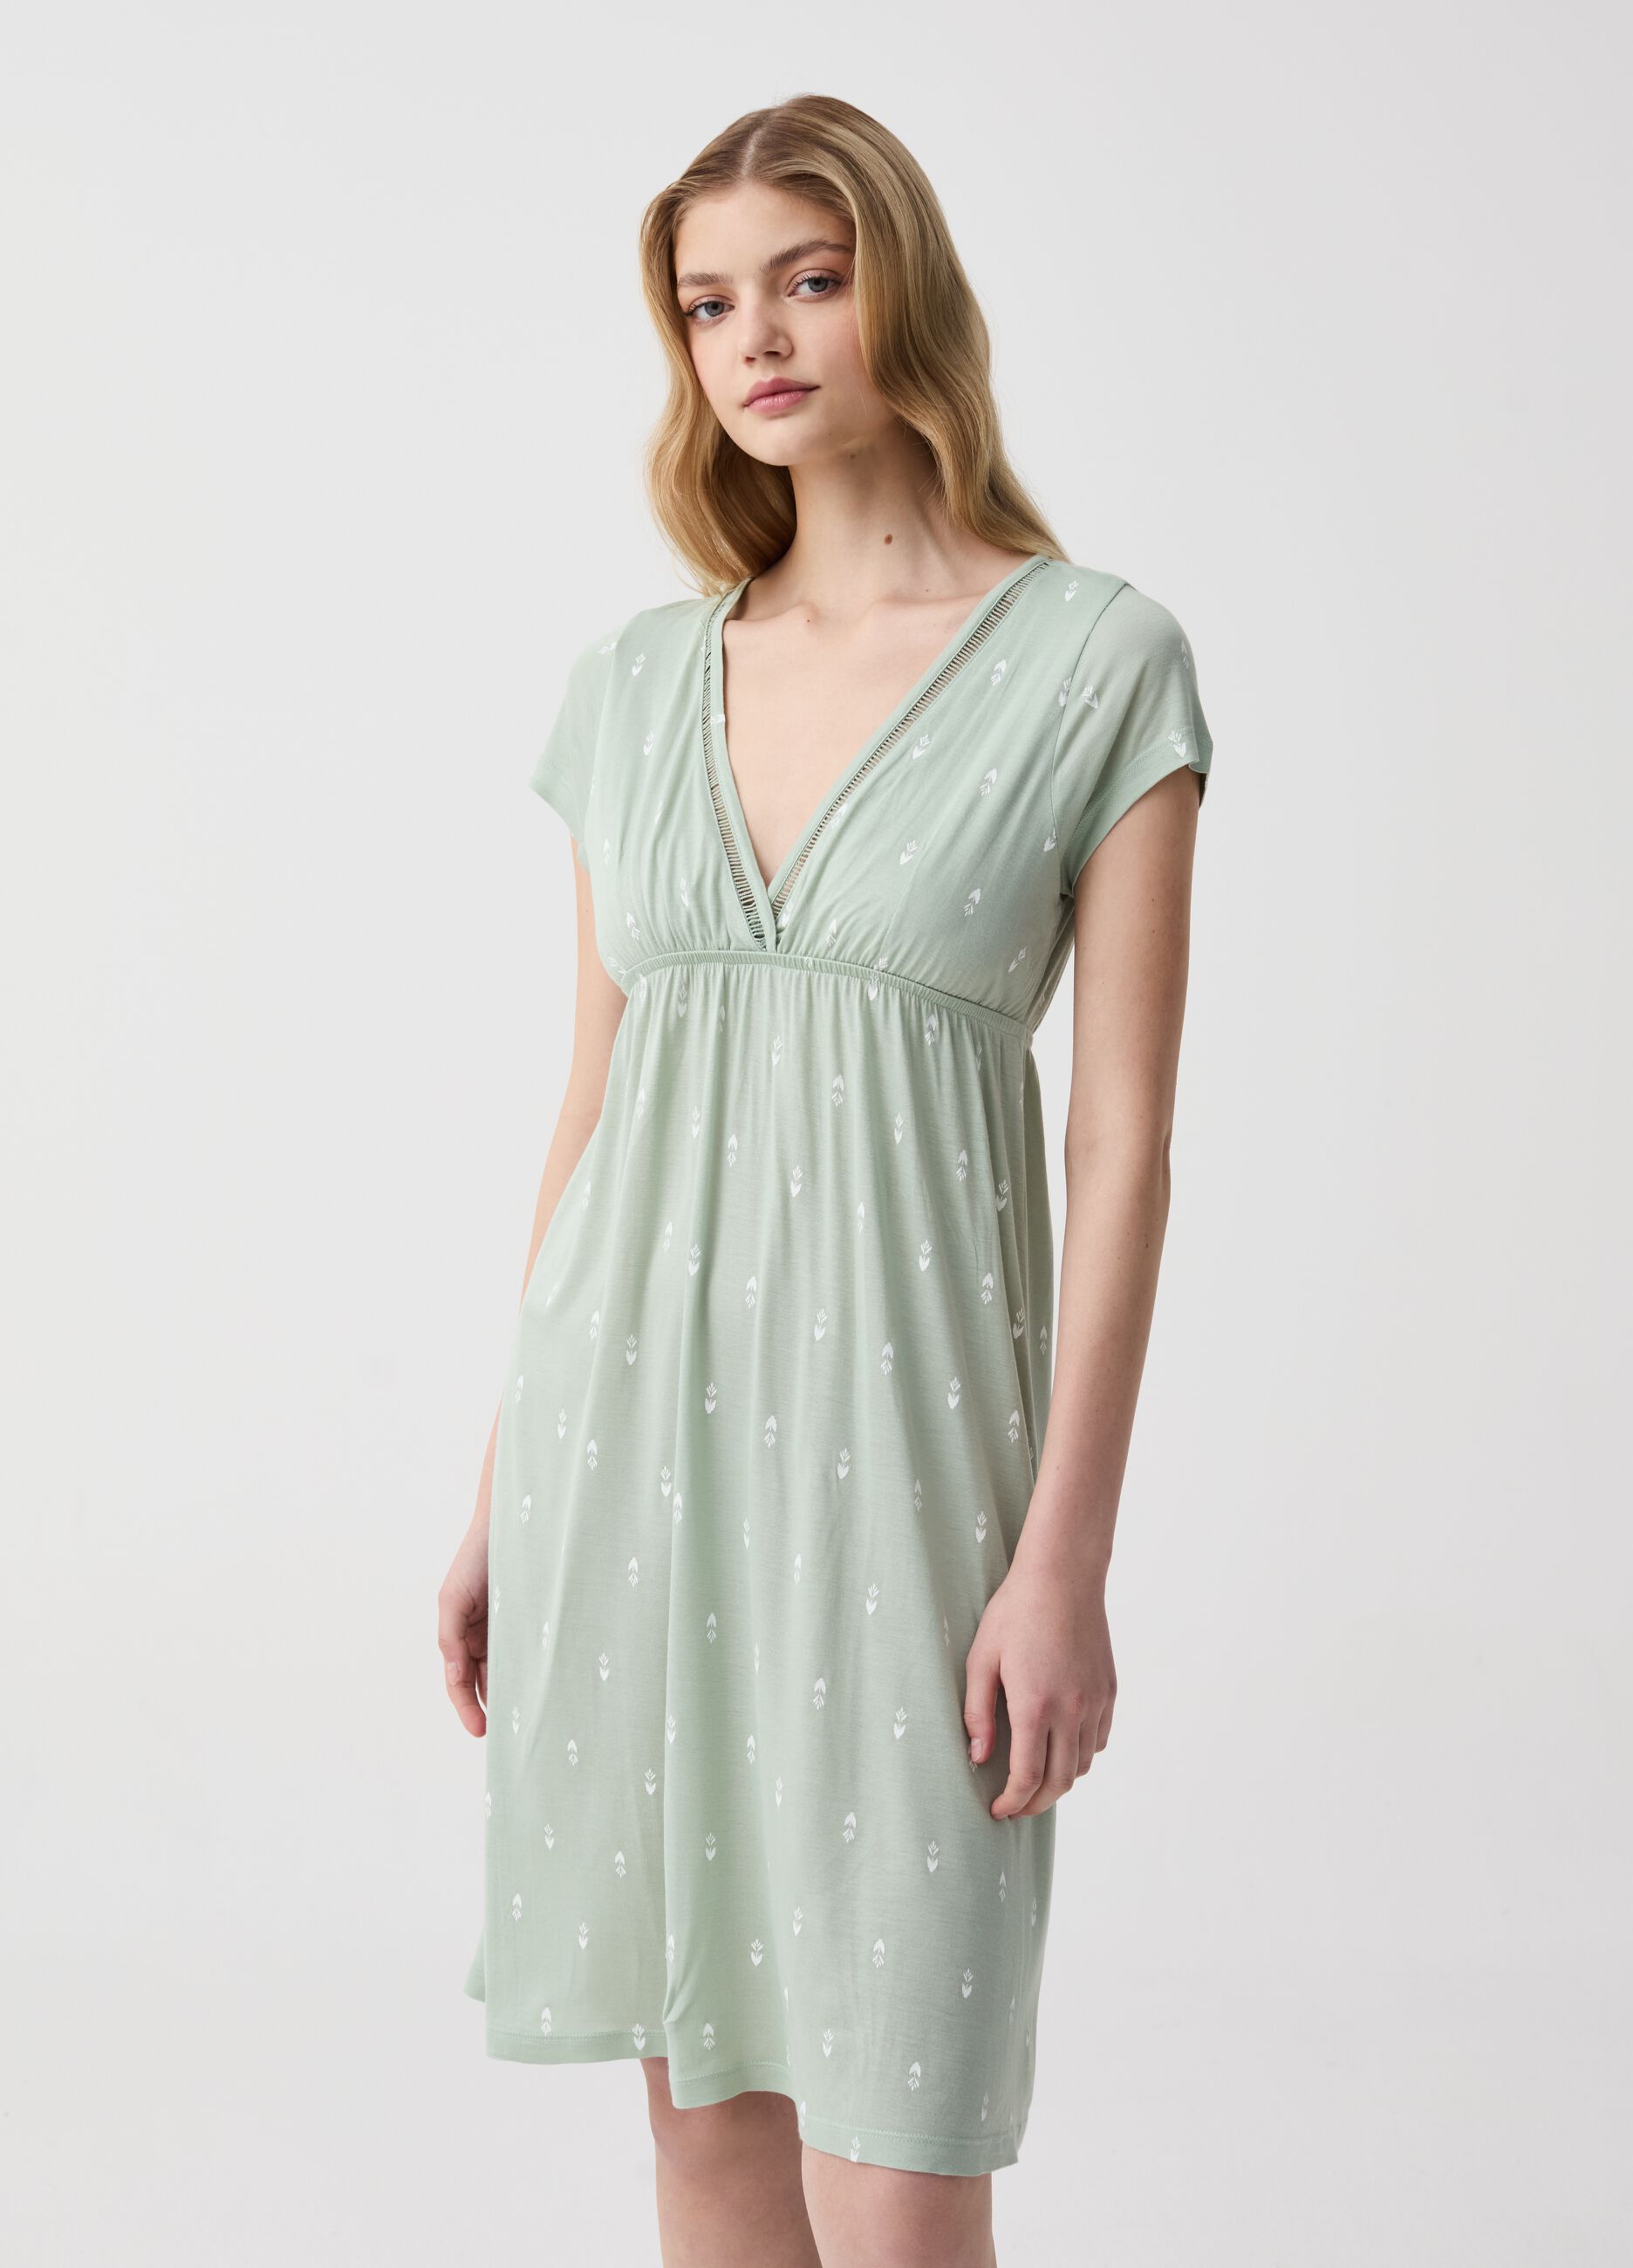 Empire-style nightdress with print